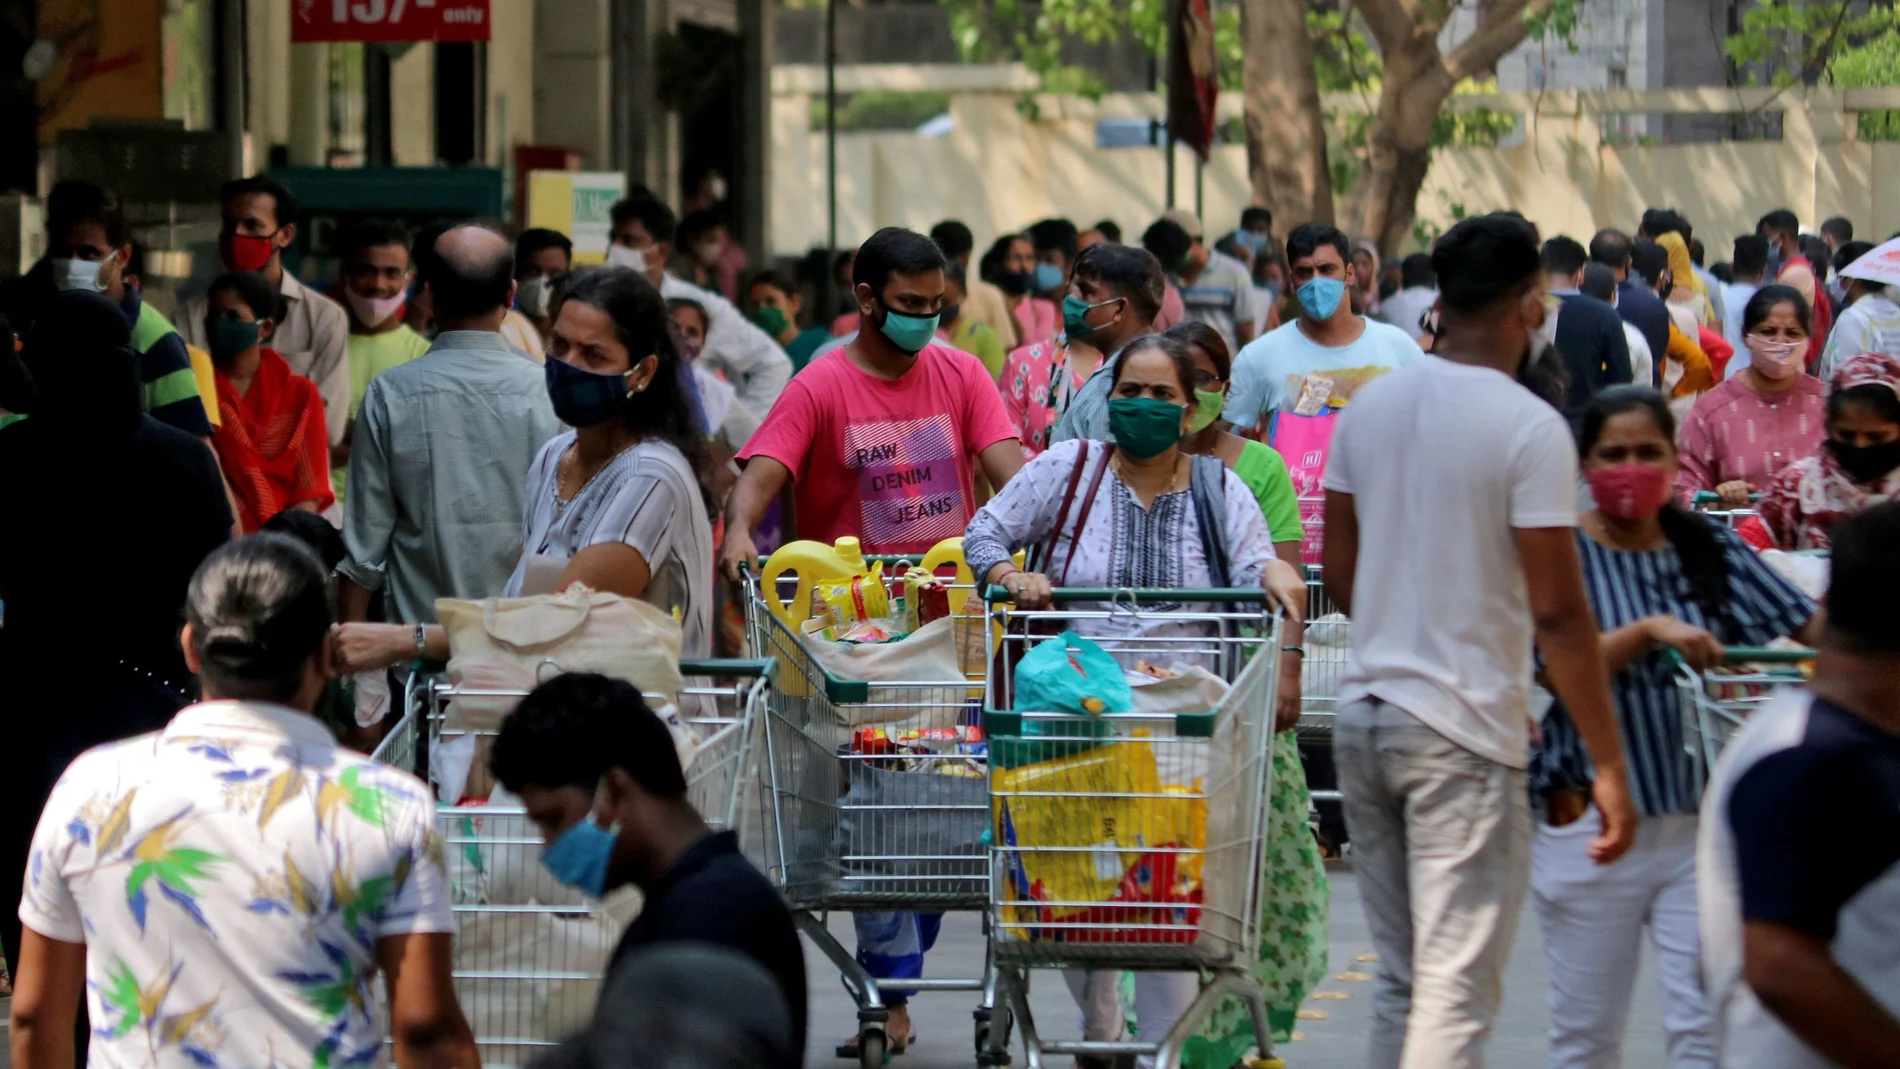 People push trolleys loaded with grocery items as others wait to enter a supermarket, amidst the spread of the coronavirus disease (COVID-19) in Mumbai, India, April 14, 2021. REUTERS/Niharika Kulkarni